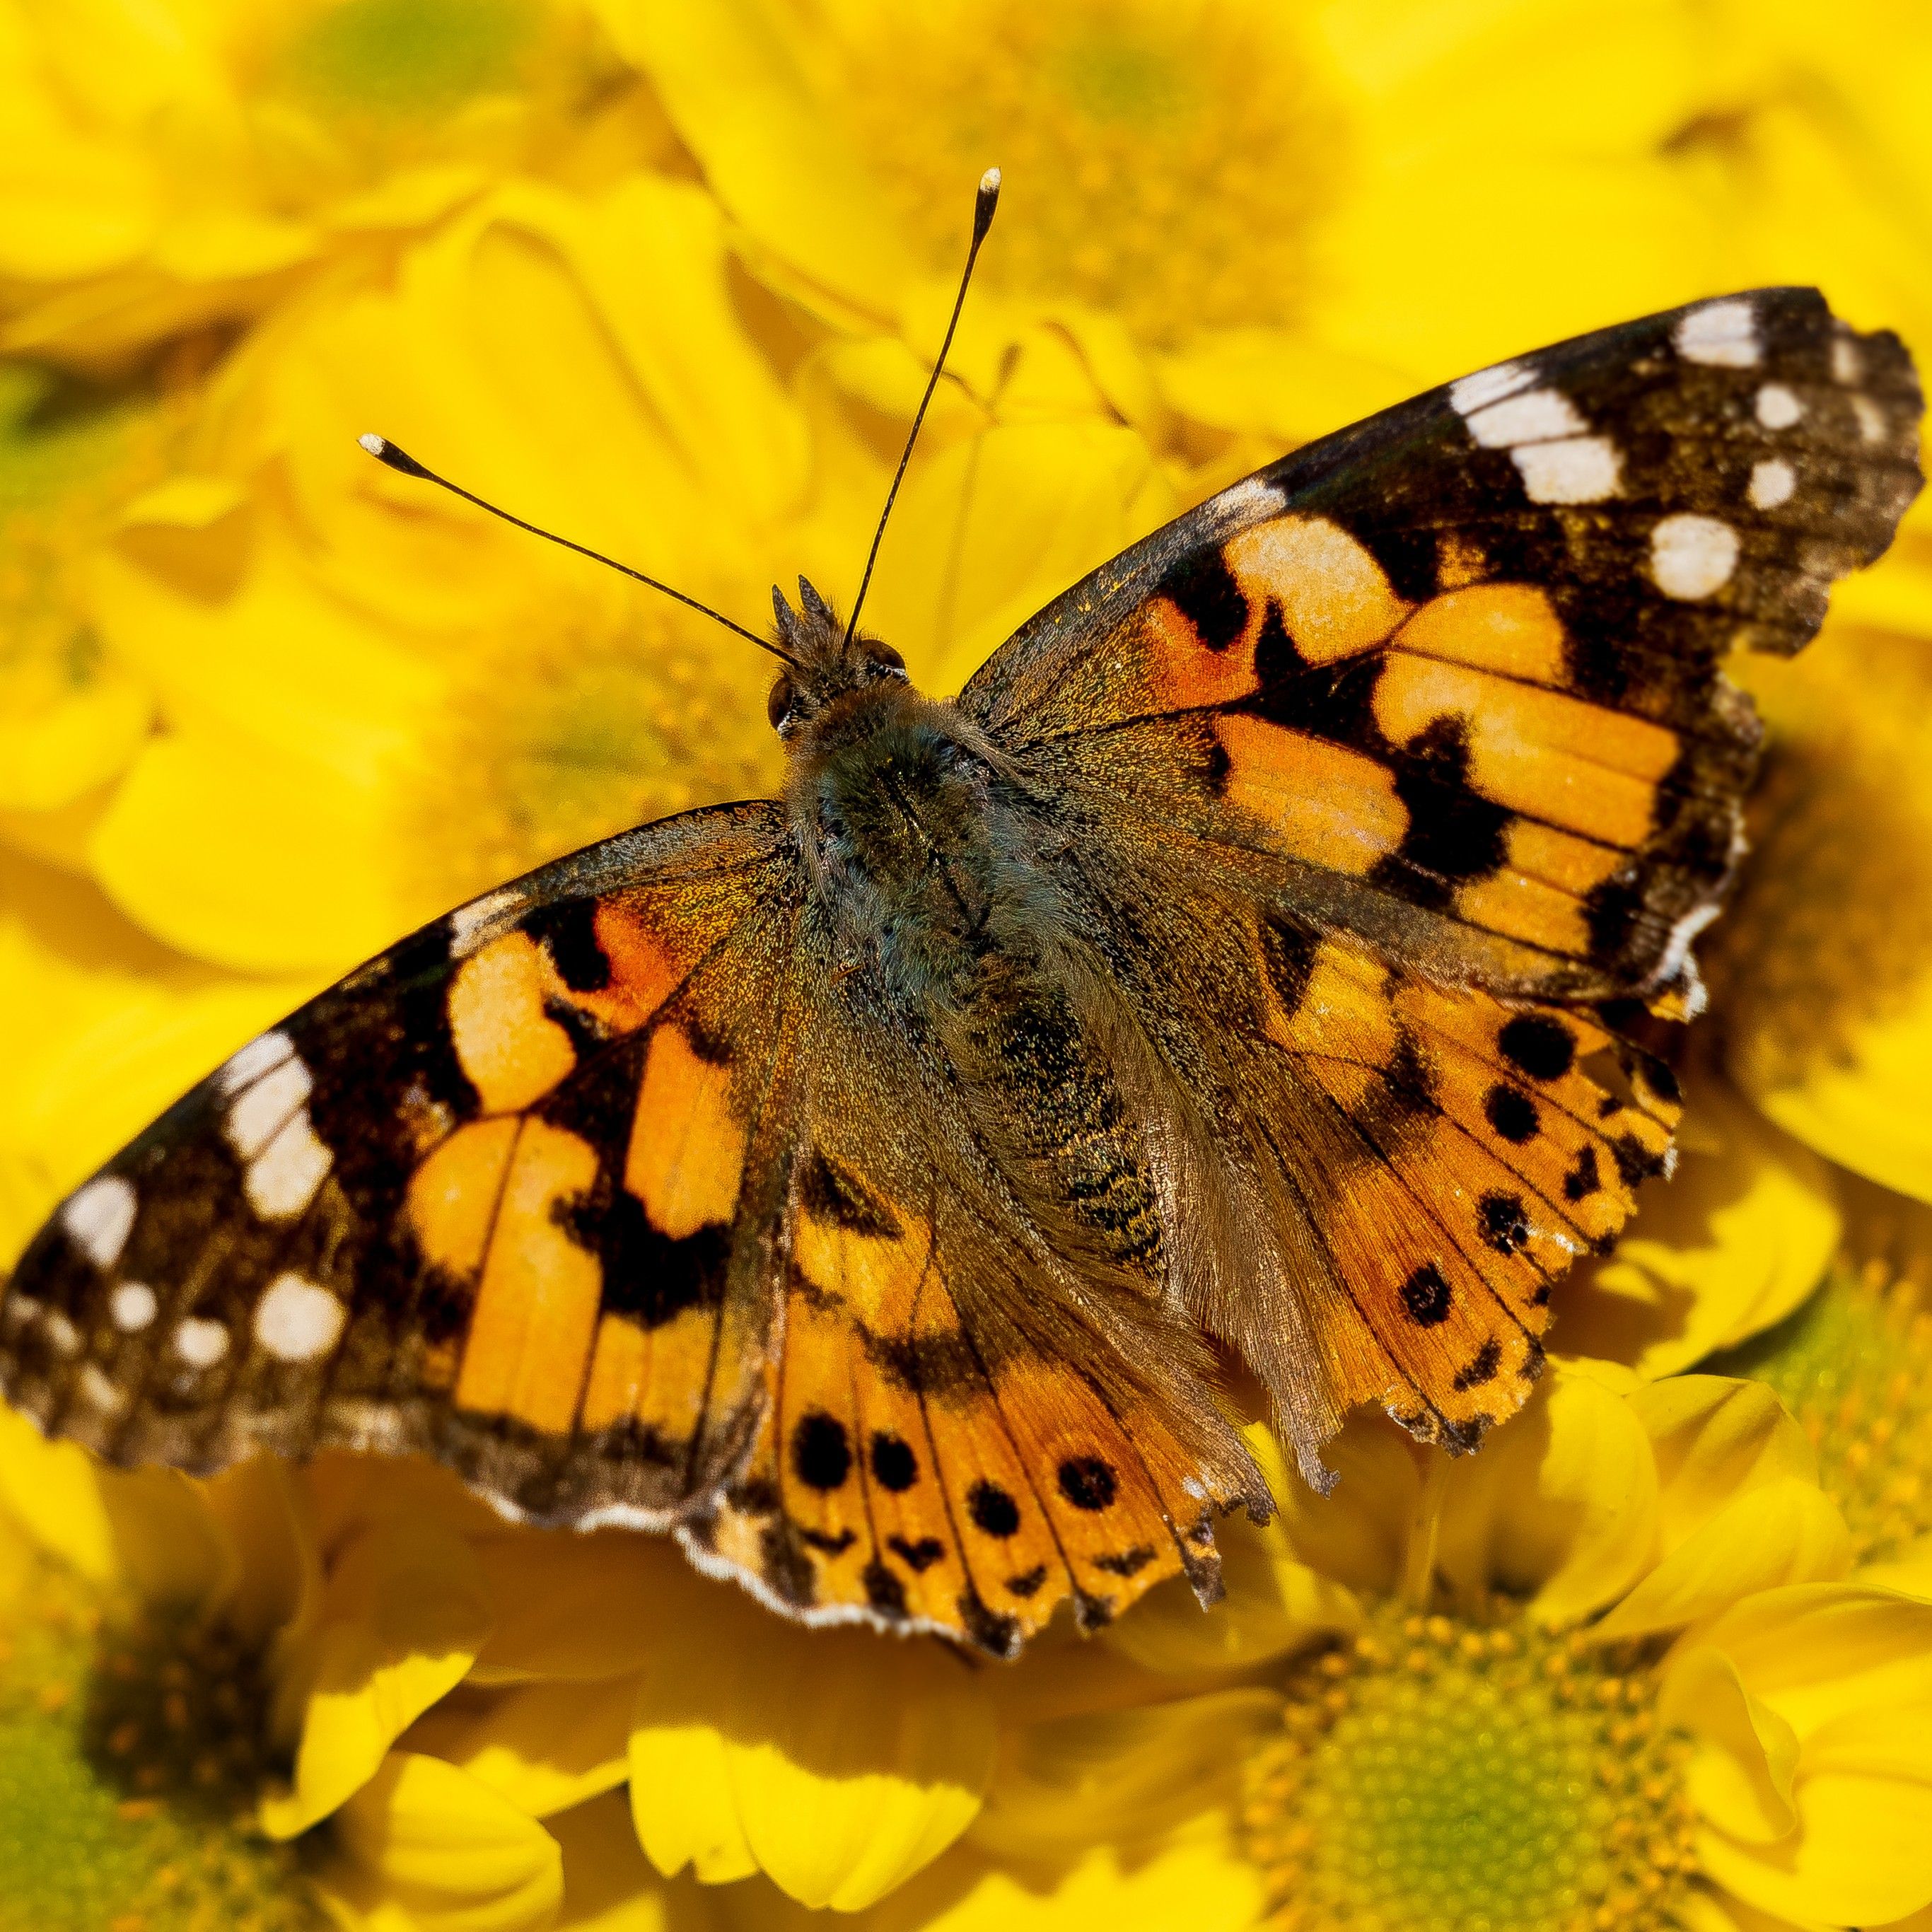 Painted Lady 4K Wallpaper, Yellow flowers, Butterfly, Insects, Closeup, Animals